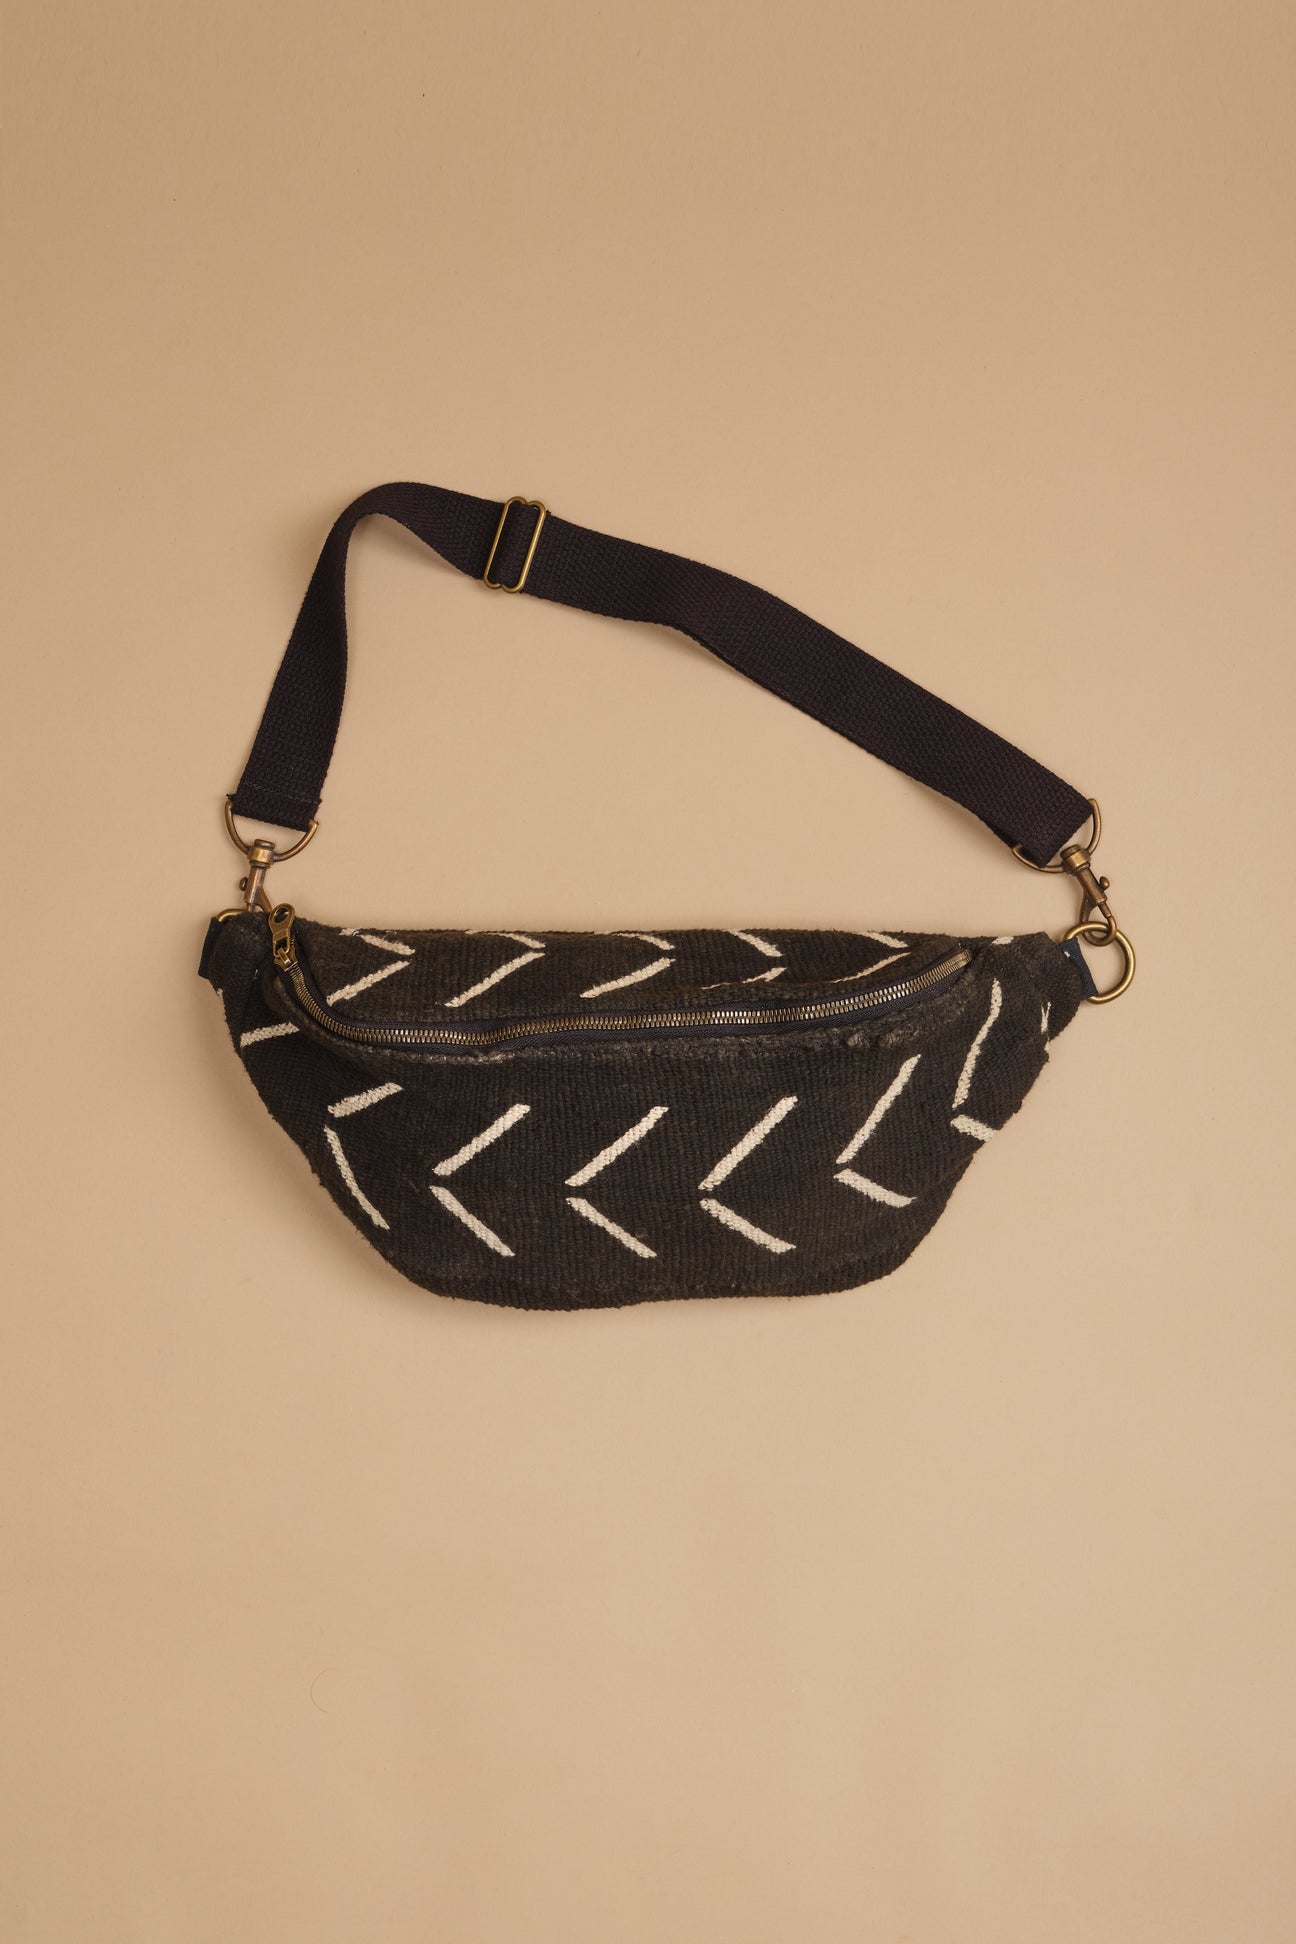 This slouchy sling is the perfect grab-and-go bag, big enough to carry all of your daily essentials and hands free to accompany you on all of your adventures and is perfect for travel. It's handmade with traditional African mud cloth and fully lined with natural canvas and two internal pockets for your essentials.